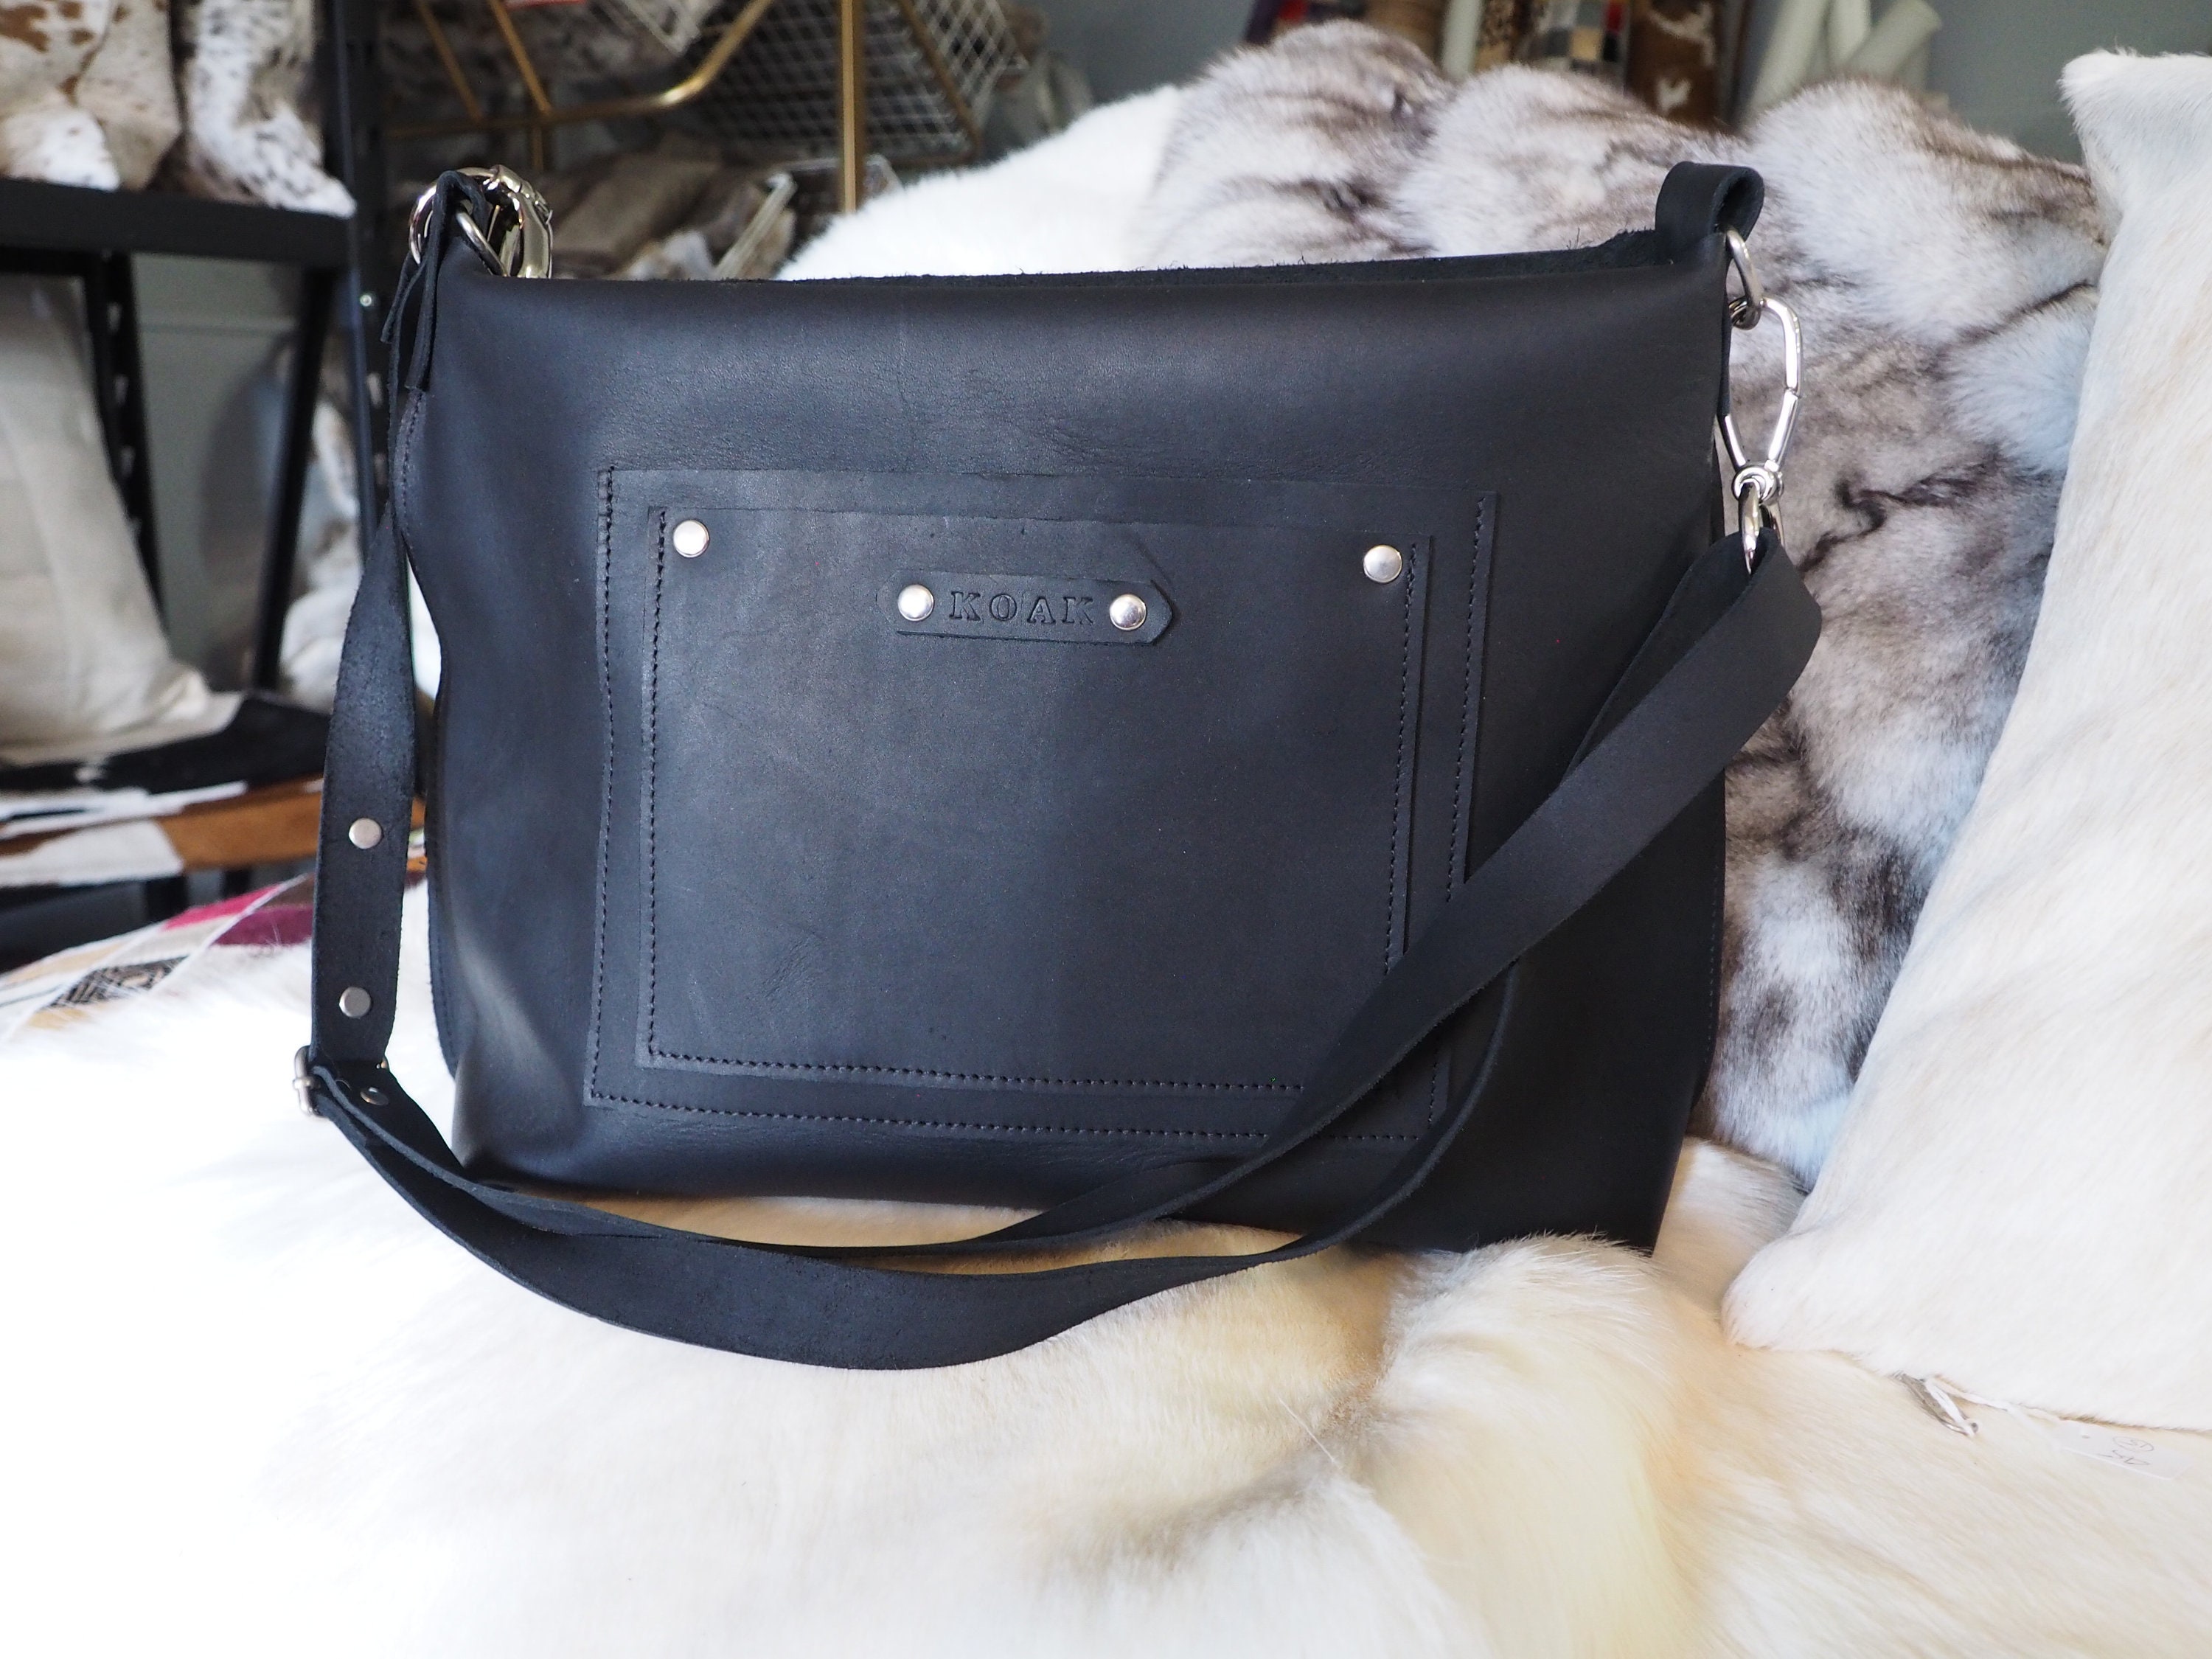 This handbag looks so good in leather! Thoughts? #diane